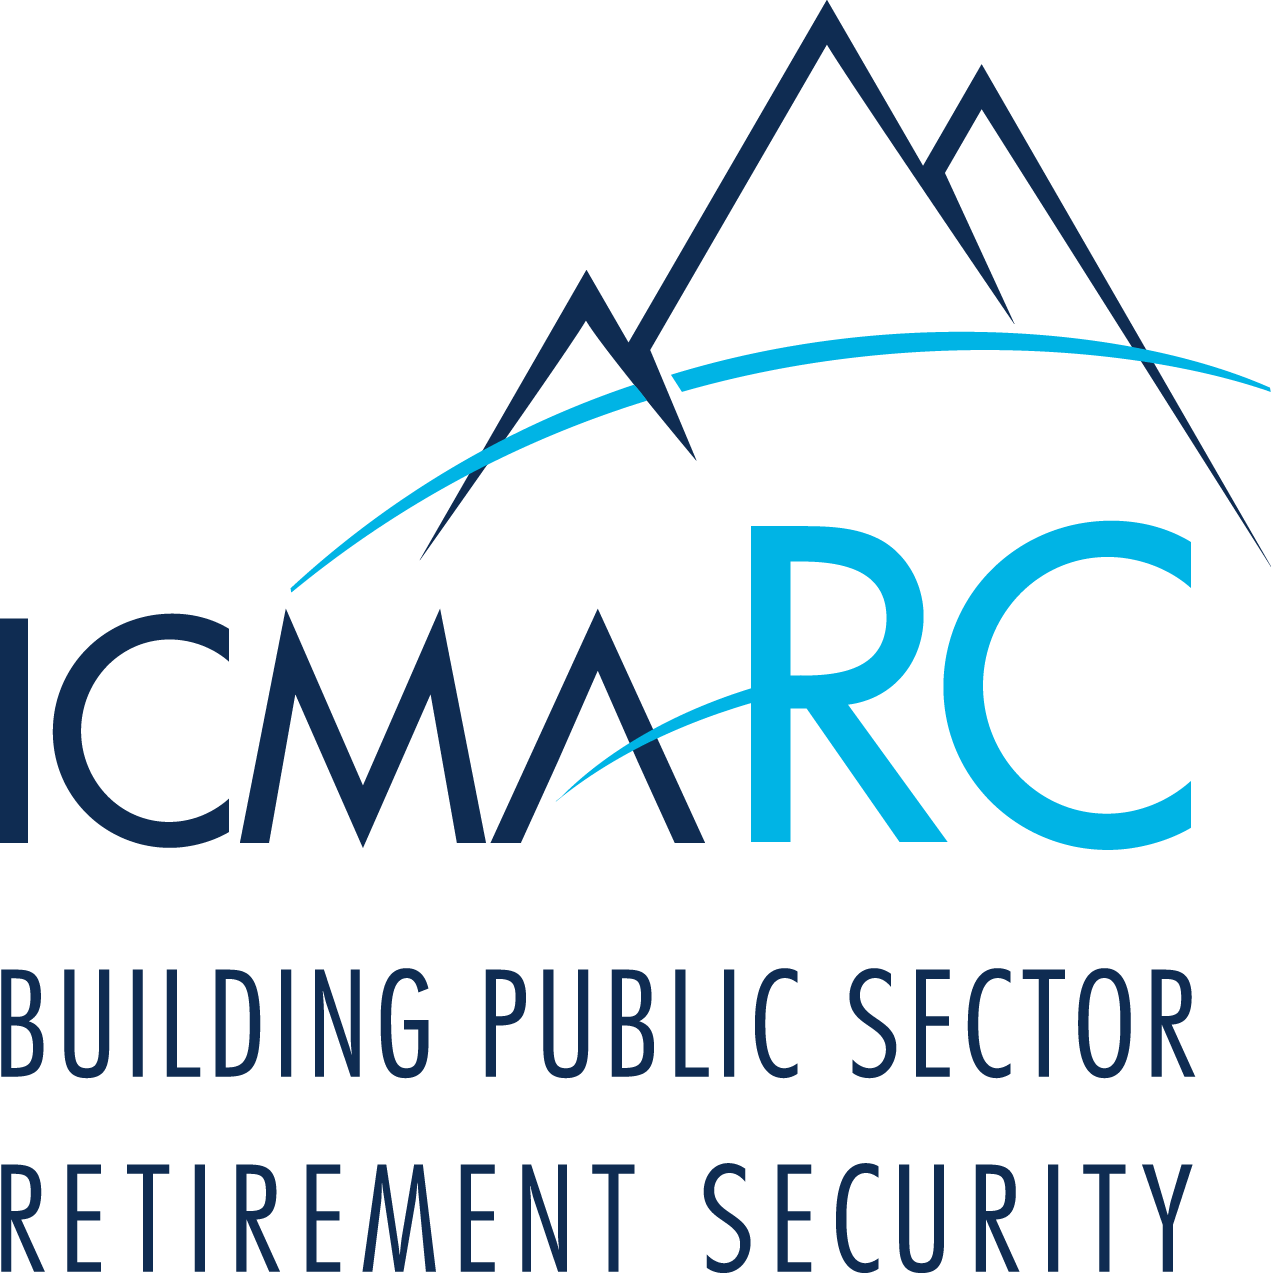 ICMA-RC Rolls Out an